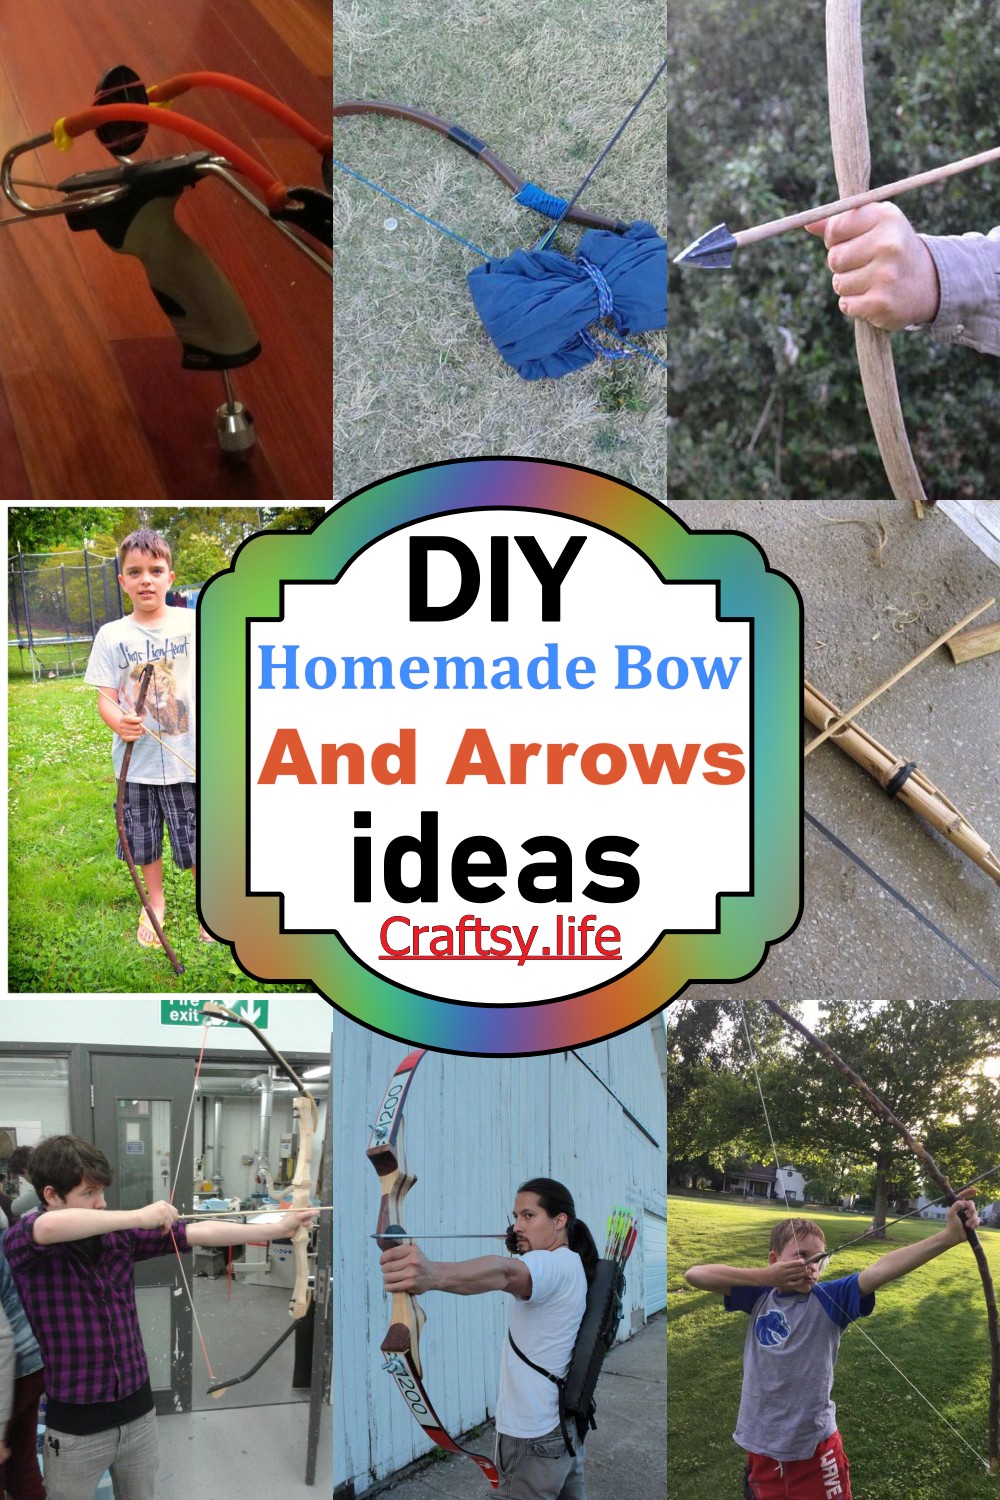 Homemade Bow And Arrows